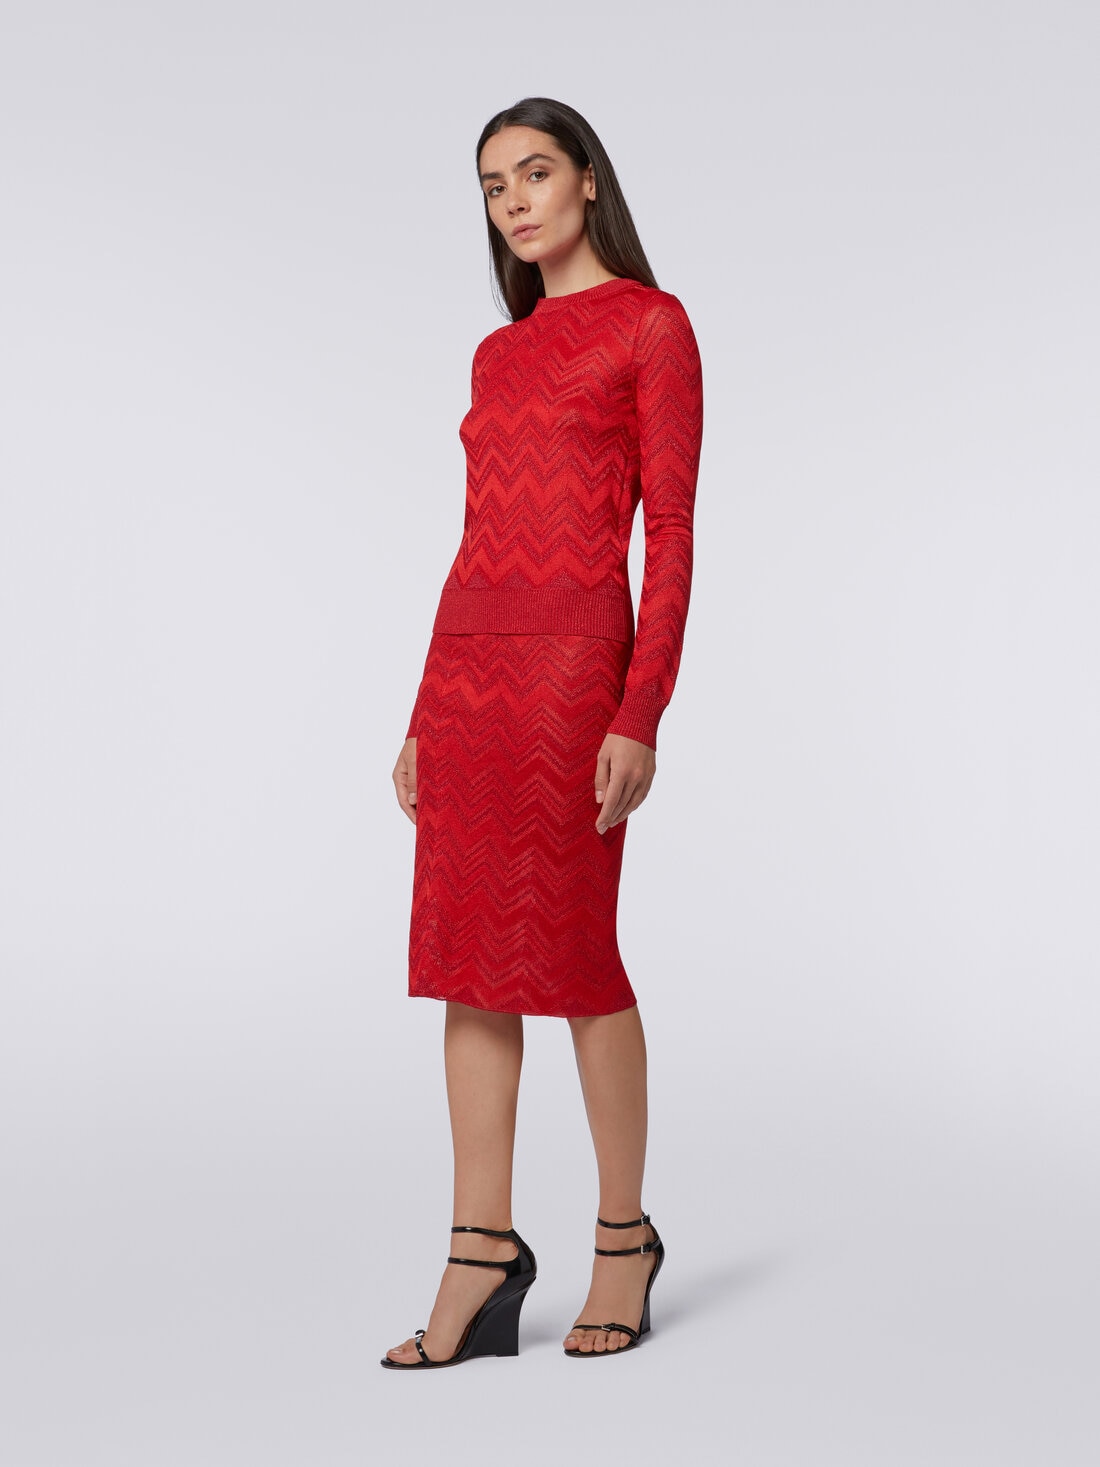 Longuette skirt in zigzag knit with lurex, Red  - DS24SH0TBK034J81756 - 2